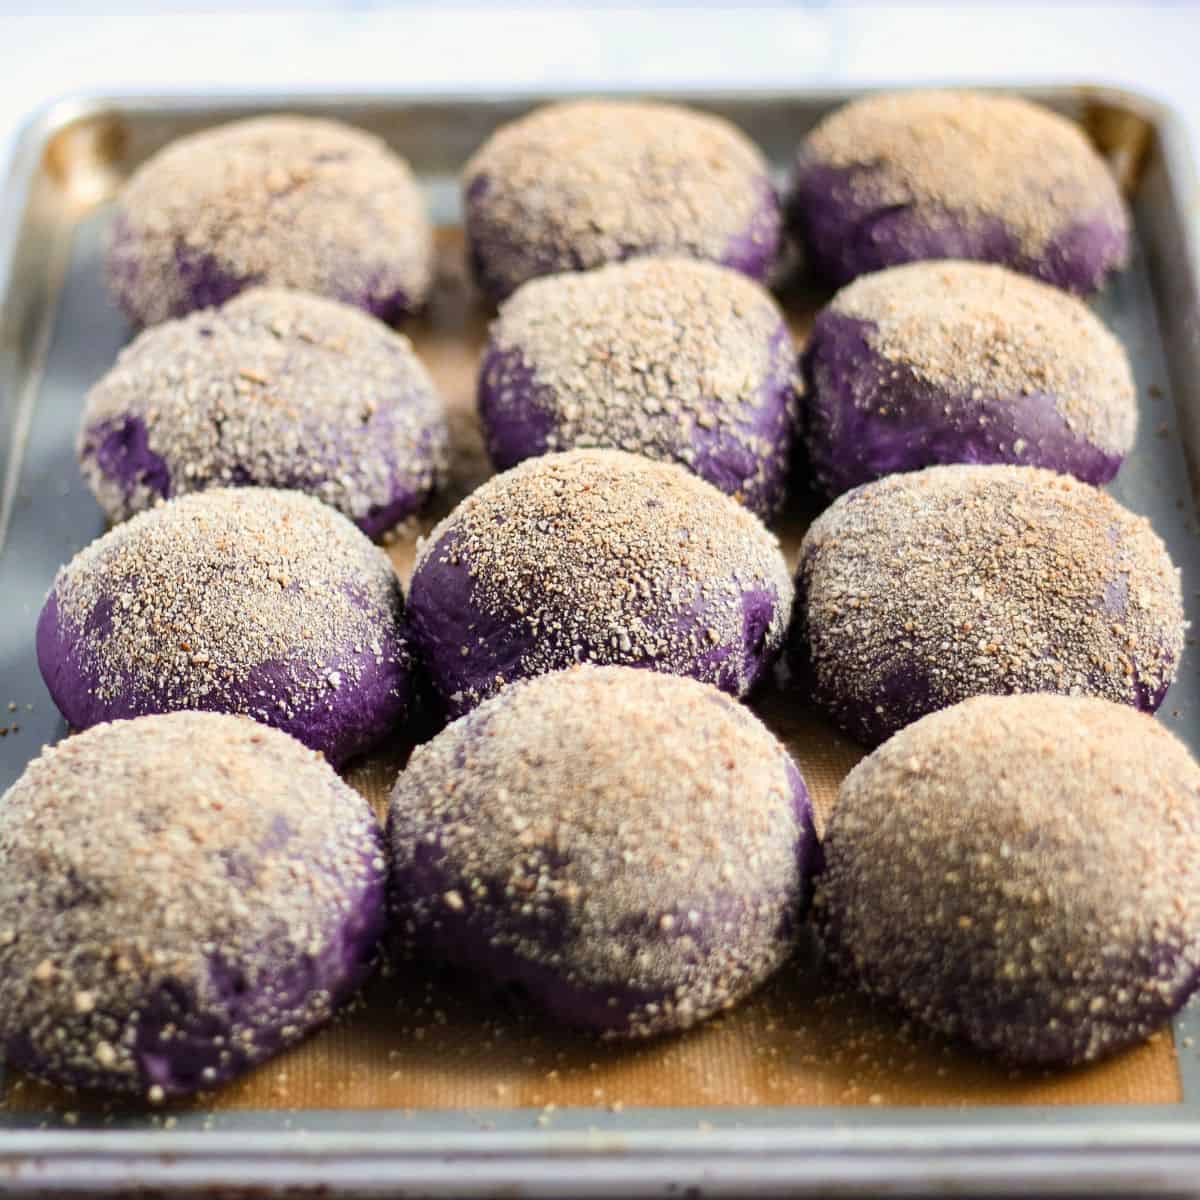 Finish dish of ube cheese pandesal in a baking tray.